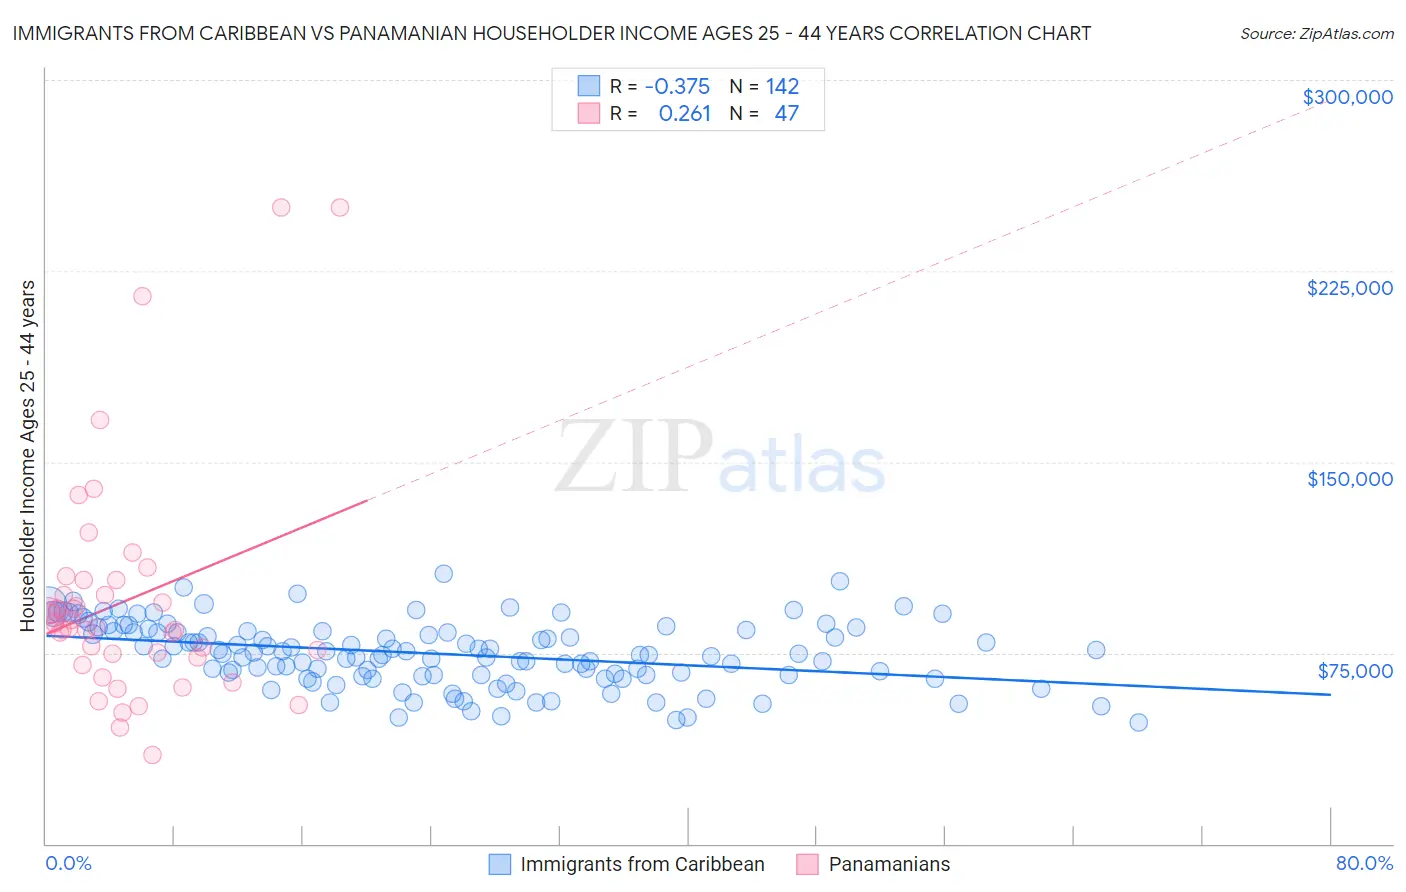 Immigrants from Caribbean vs Panamanian Householder Income Ages 25 - 44 years